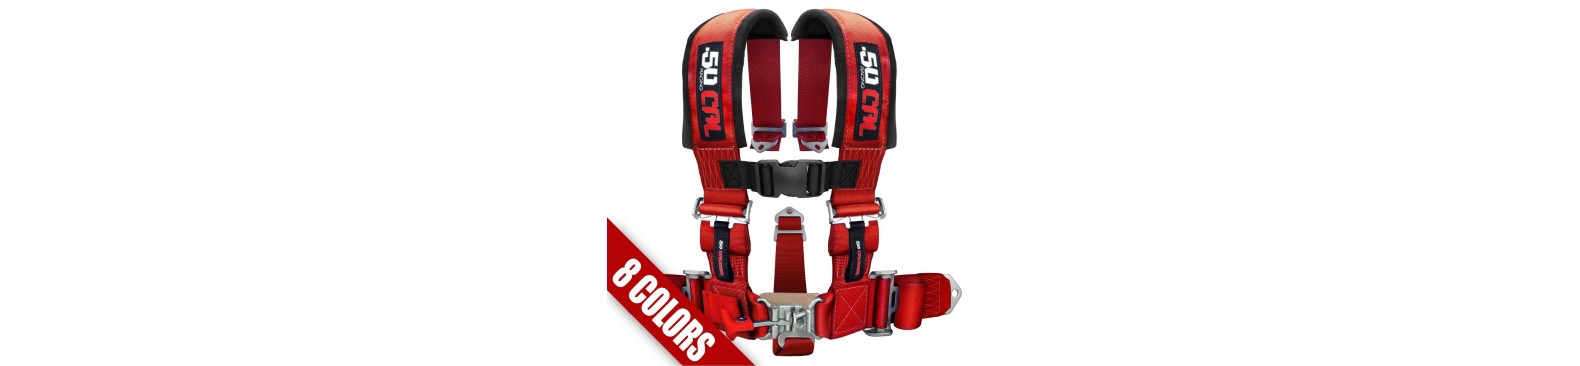 safety gear, 4 and 5 point harnesses bolt in, clip in, or wrap around